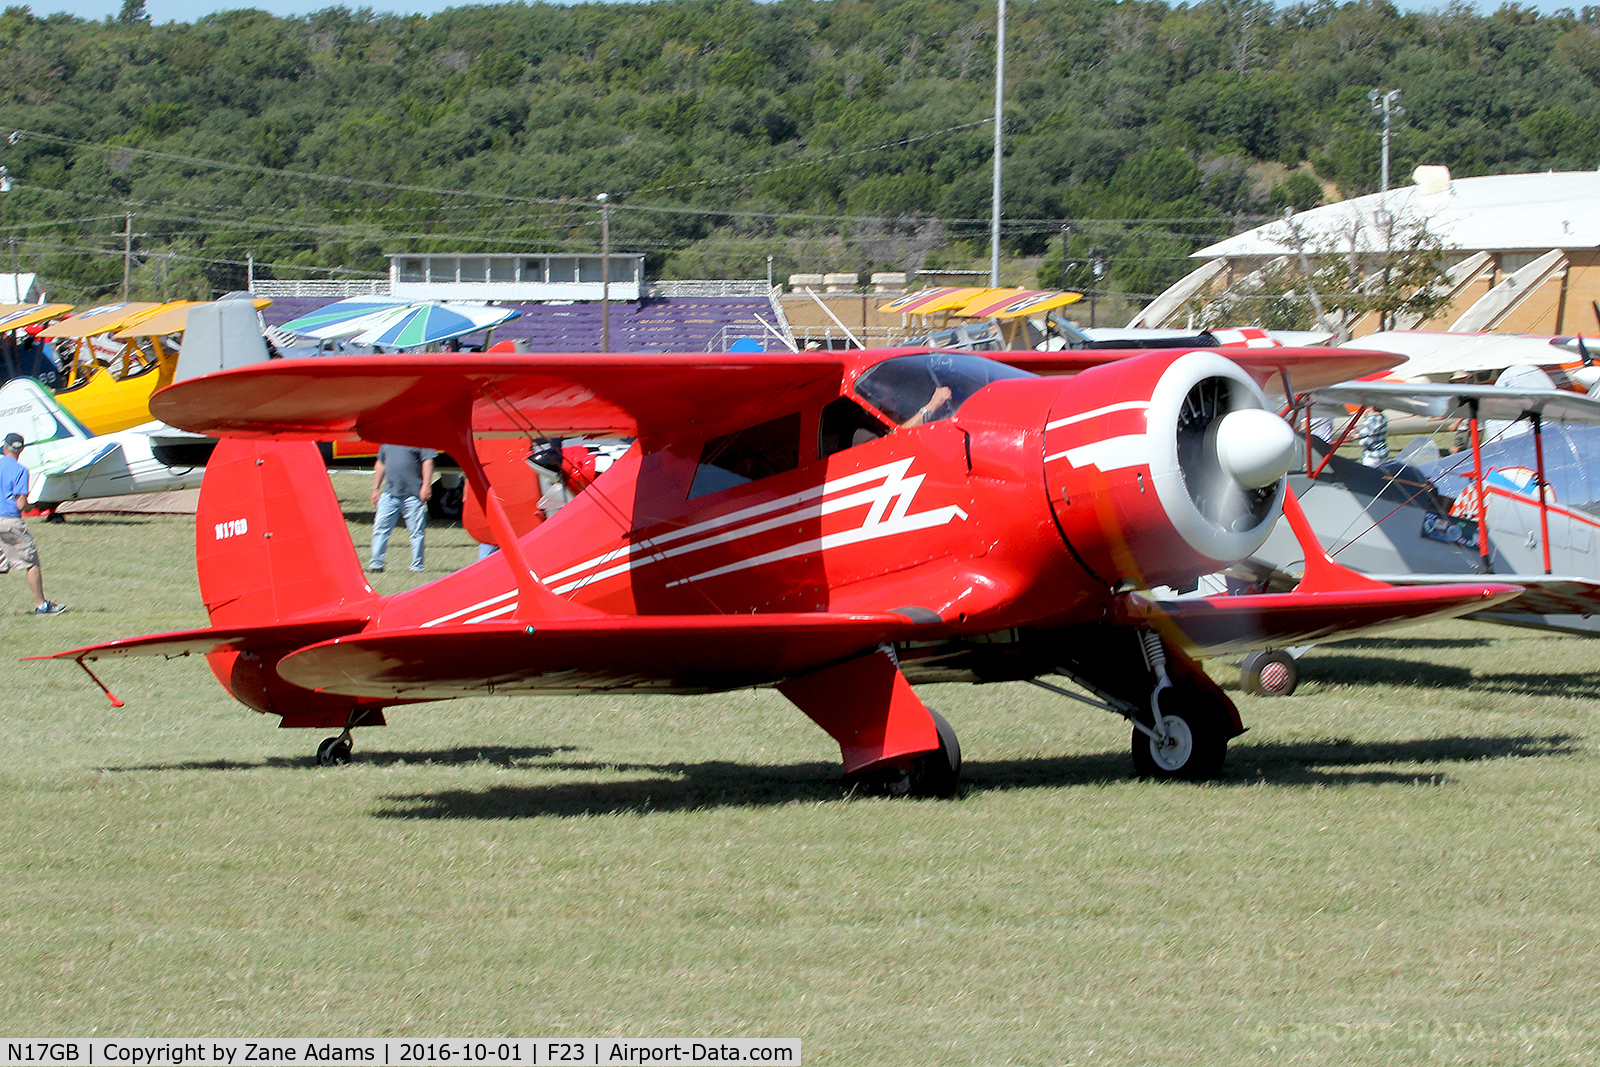 N17GB, 1943 Beech D17S Staggerwing C/N 4818, At the 2017 Ranger Fly-in